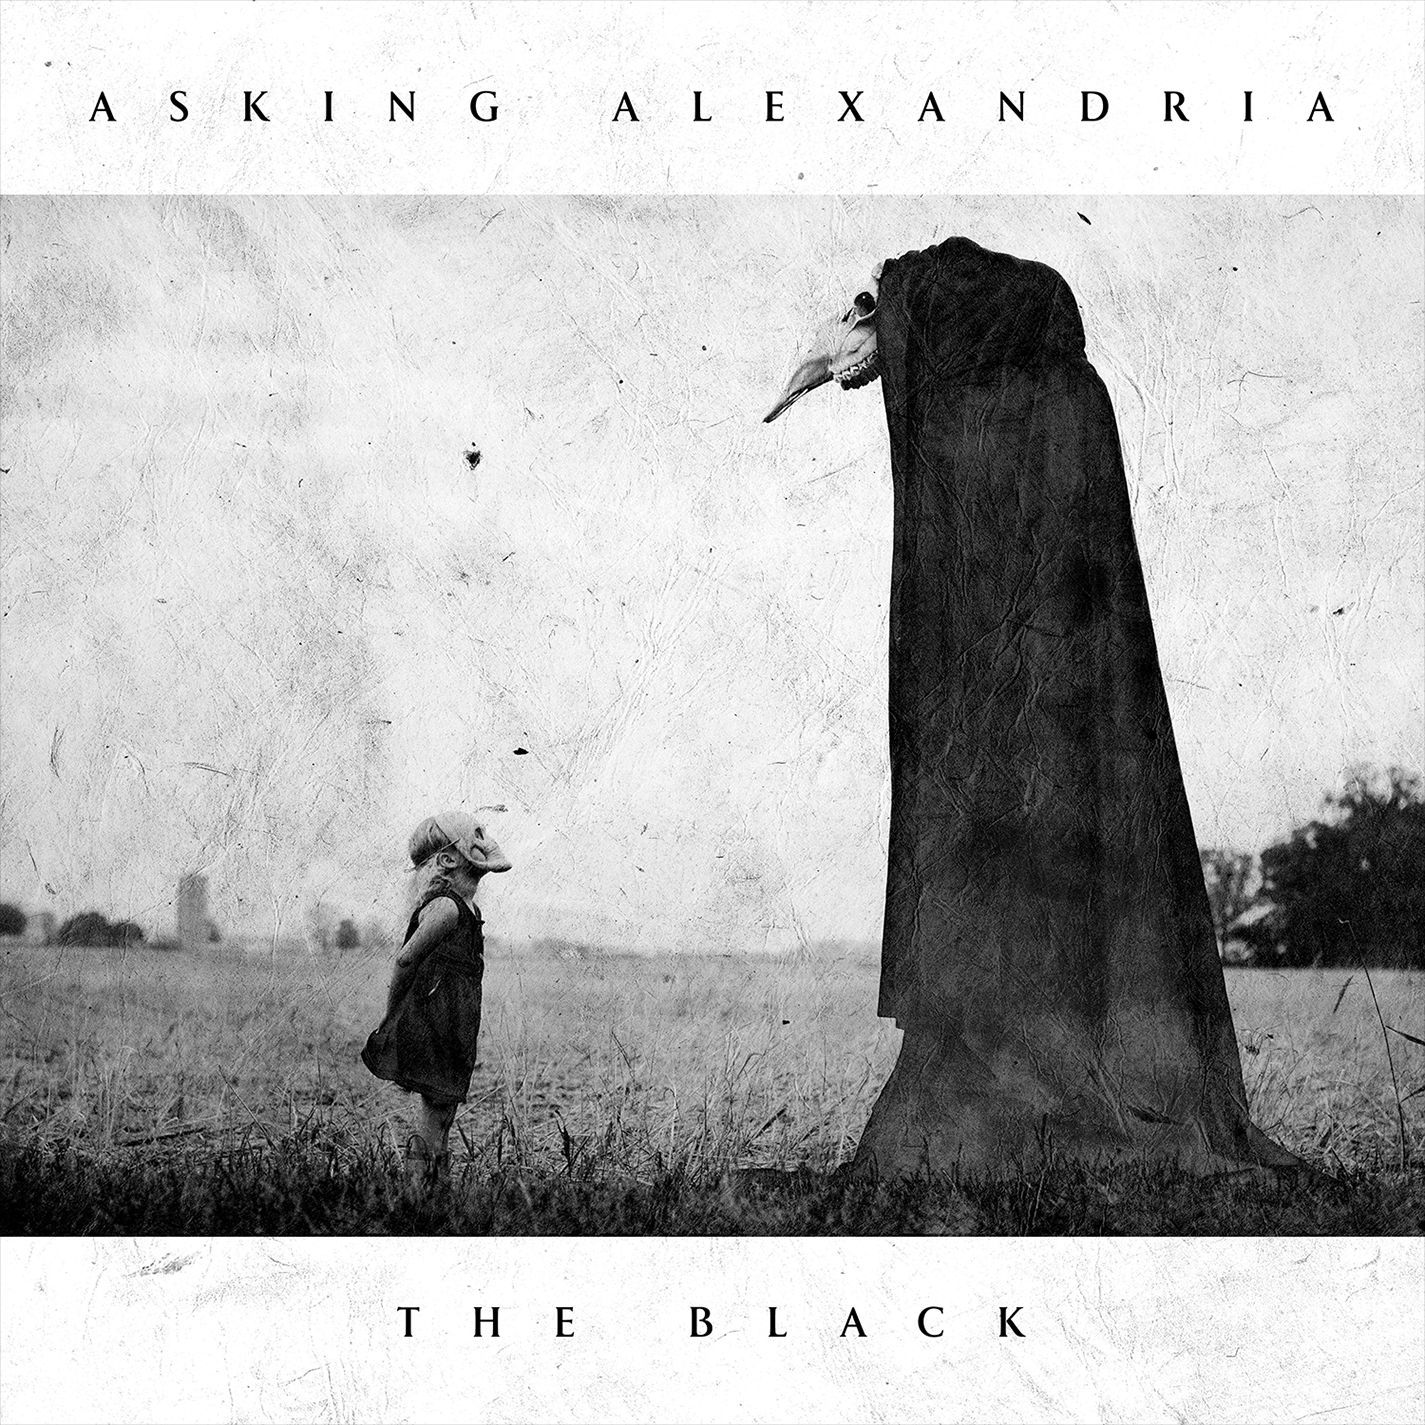 “The Black” by Asking Alexandria